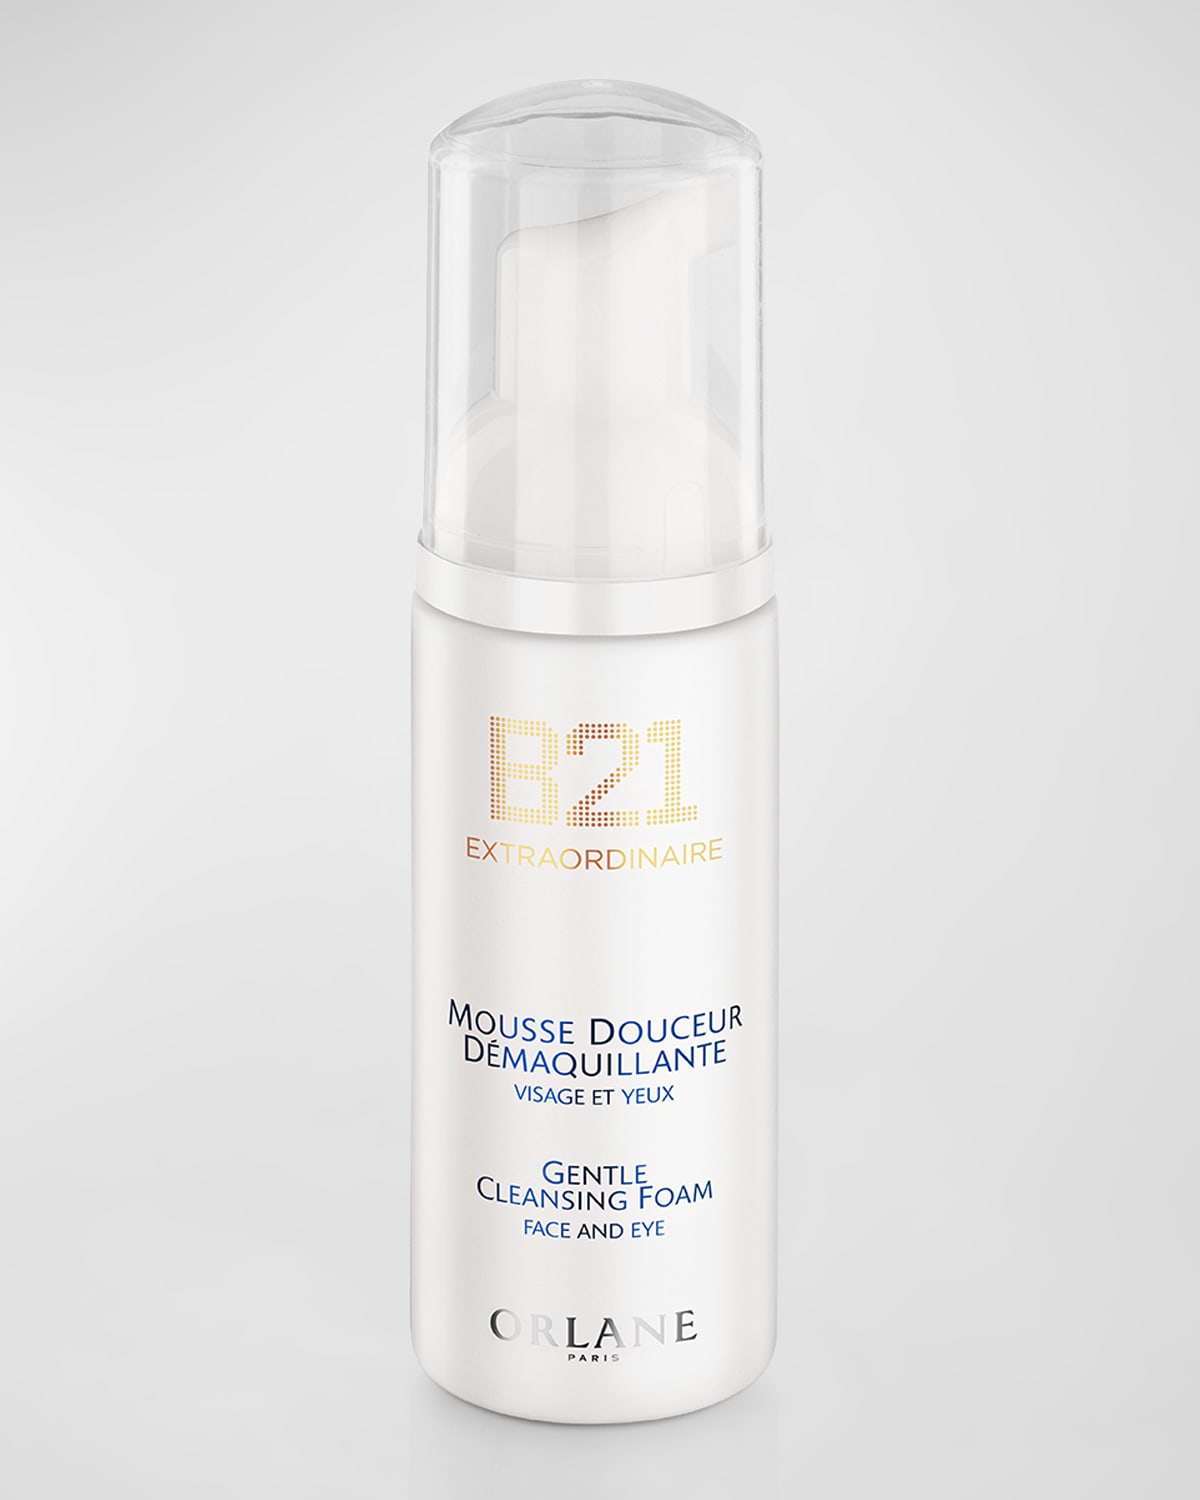 B21 Extraordinaire Gentle Cleansing Foam, Yours with any $75 Orlane Order